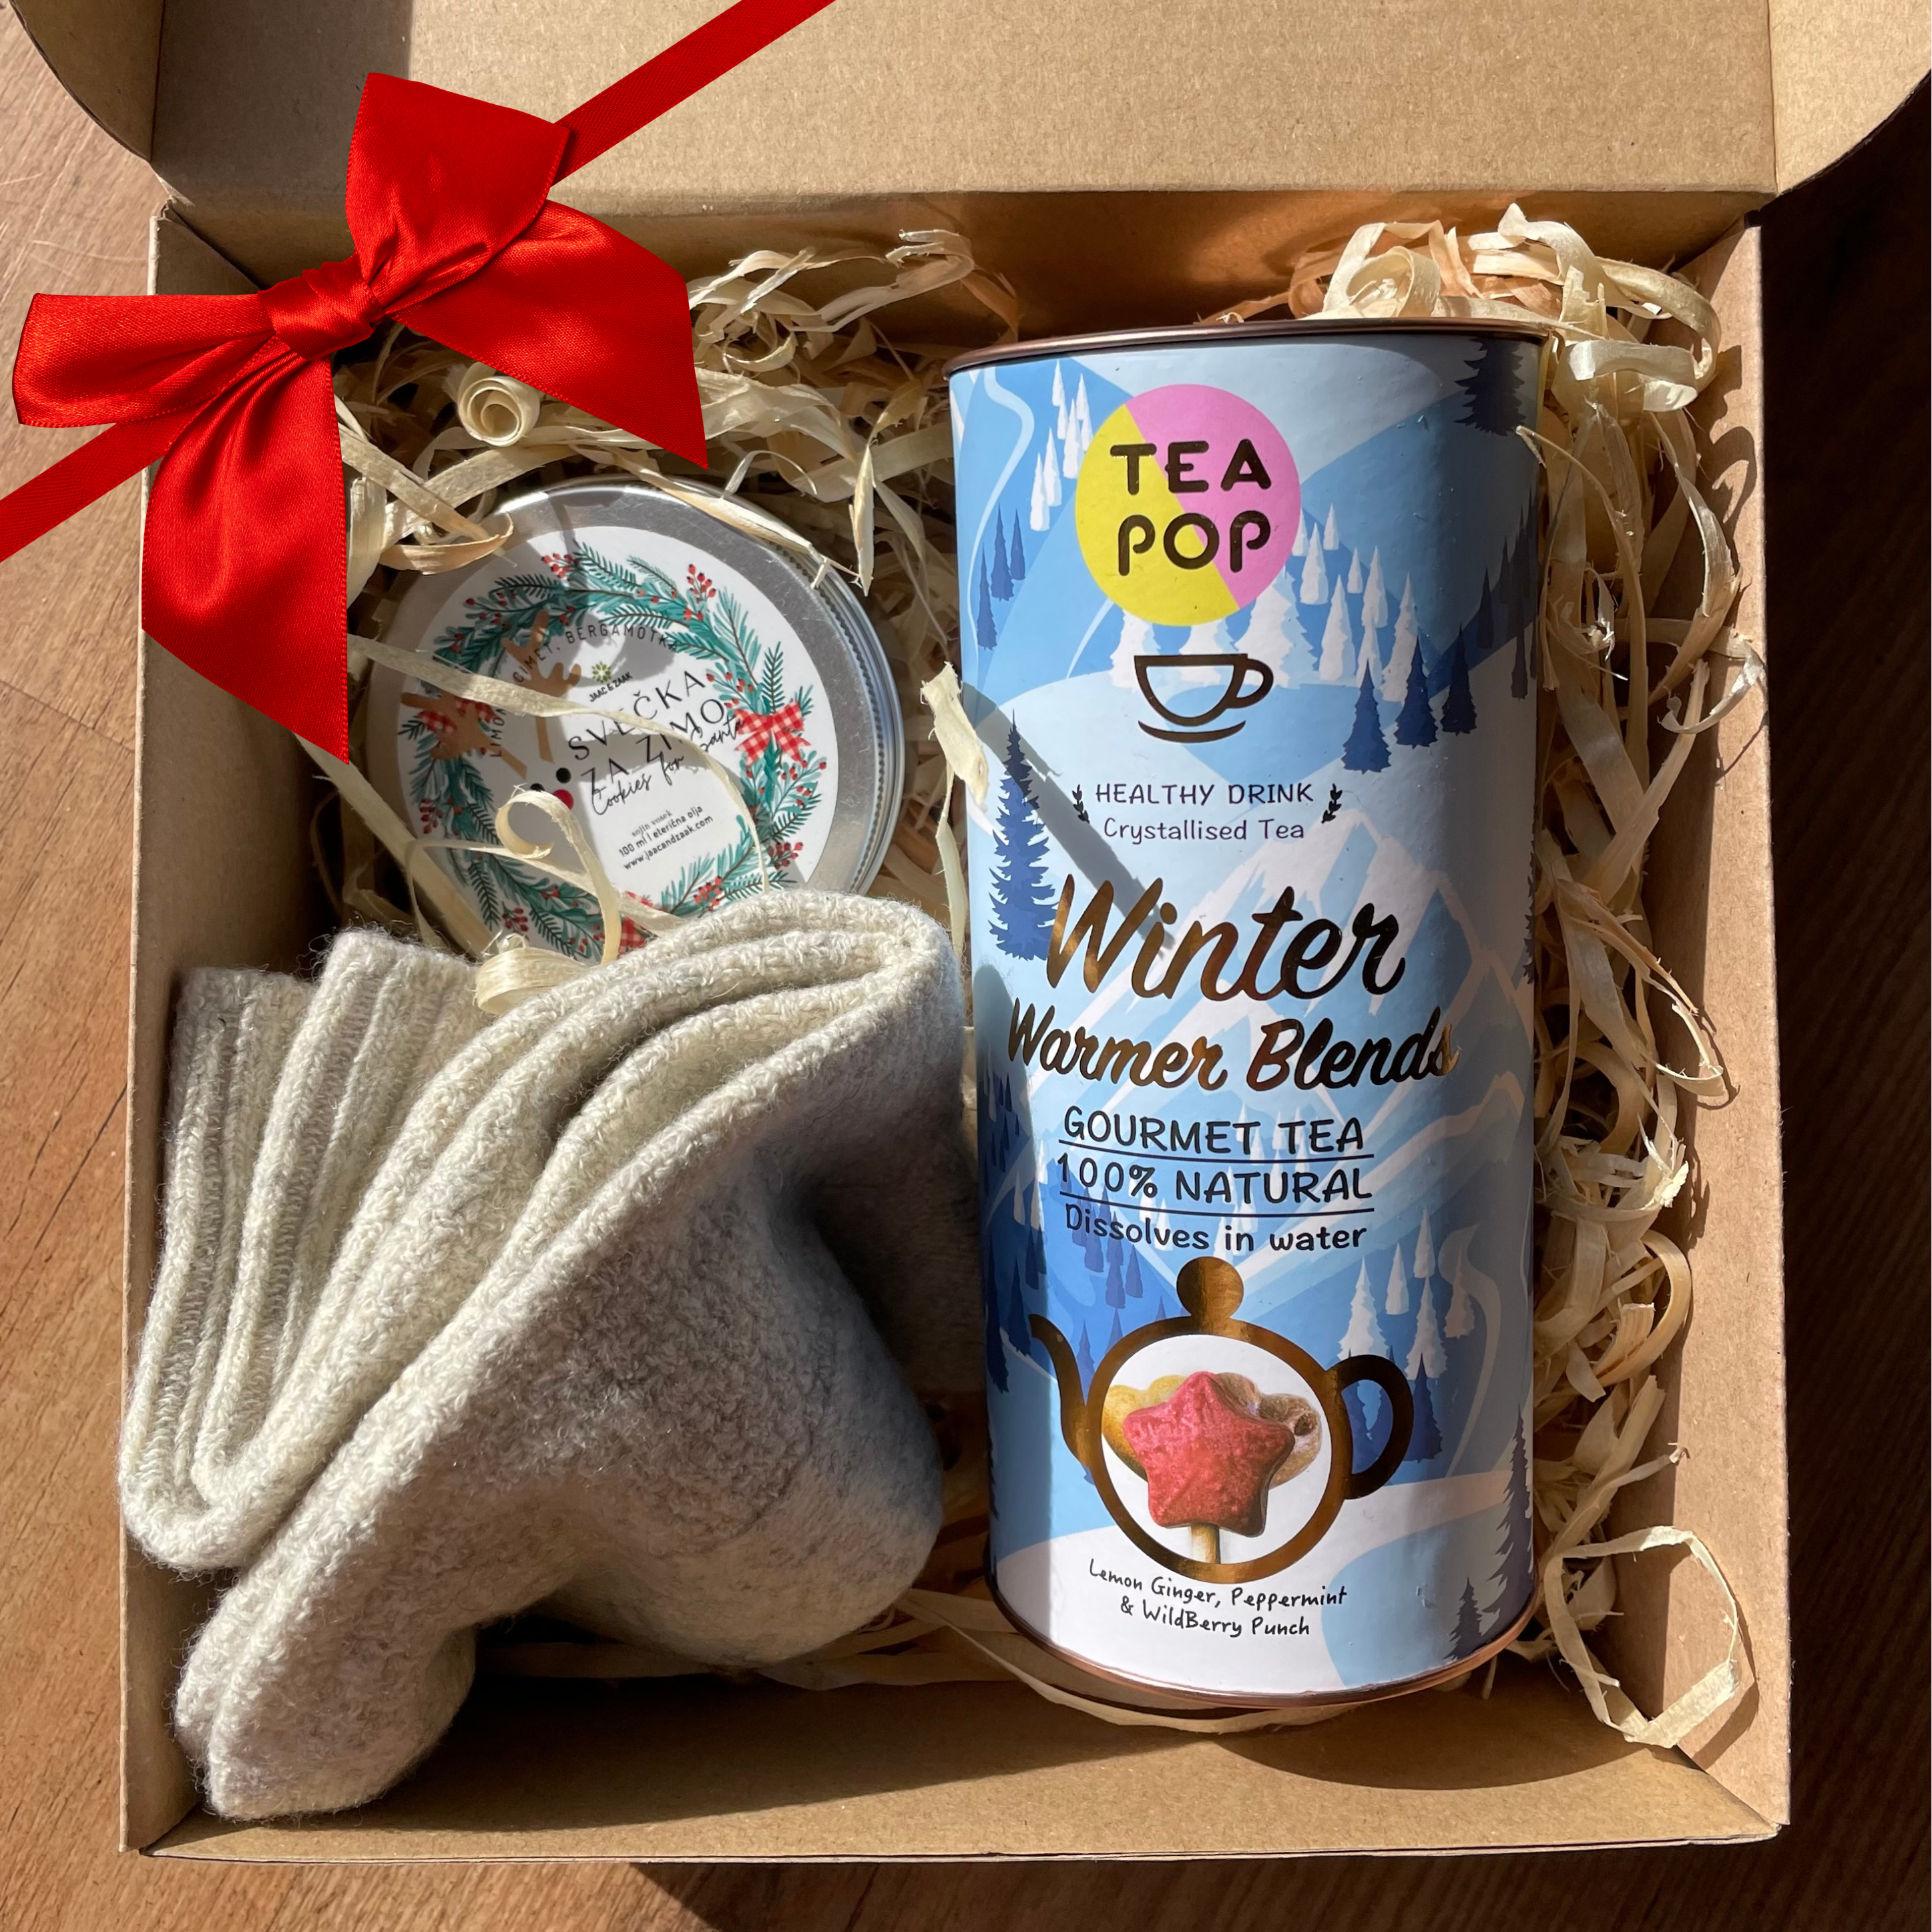 MAXI HYGGE PRESENTS - Tea pop Winter tea and Wool Socks Fuzzy Beige M (Size 36-41), Cookies for santa candle